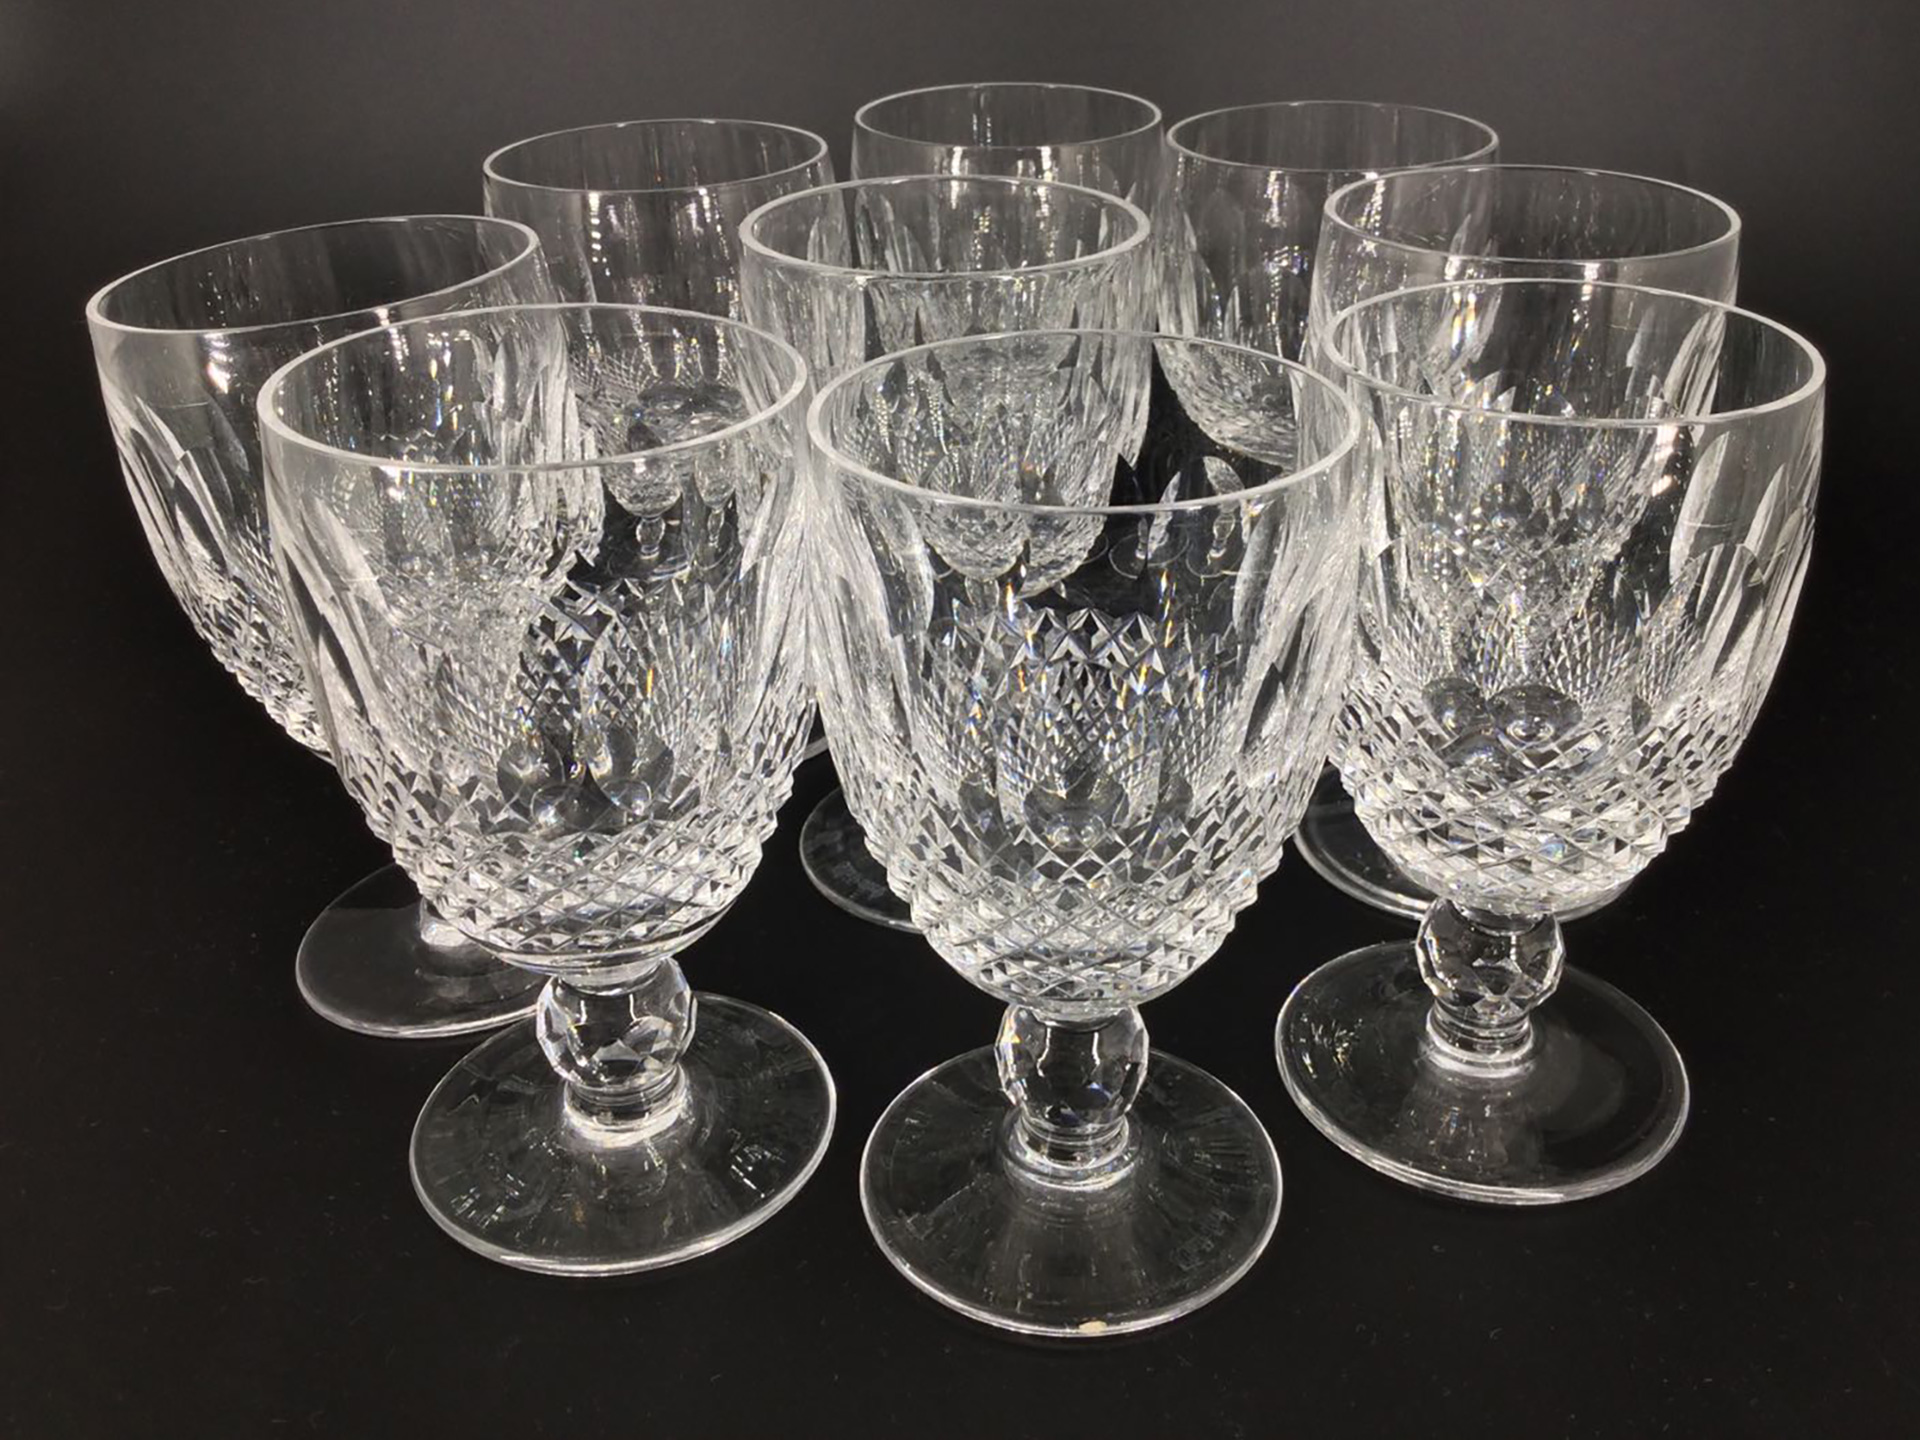 the-history-heritage-and-timeless-heirlooms-of-harry-p-archinal-16-waterford-crystal-sherry-glasses